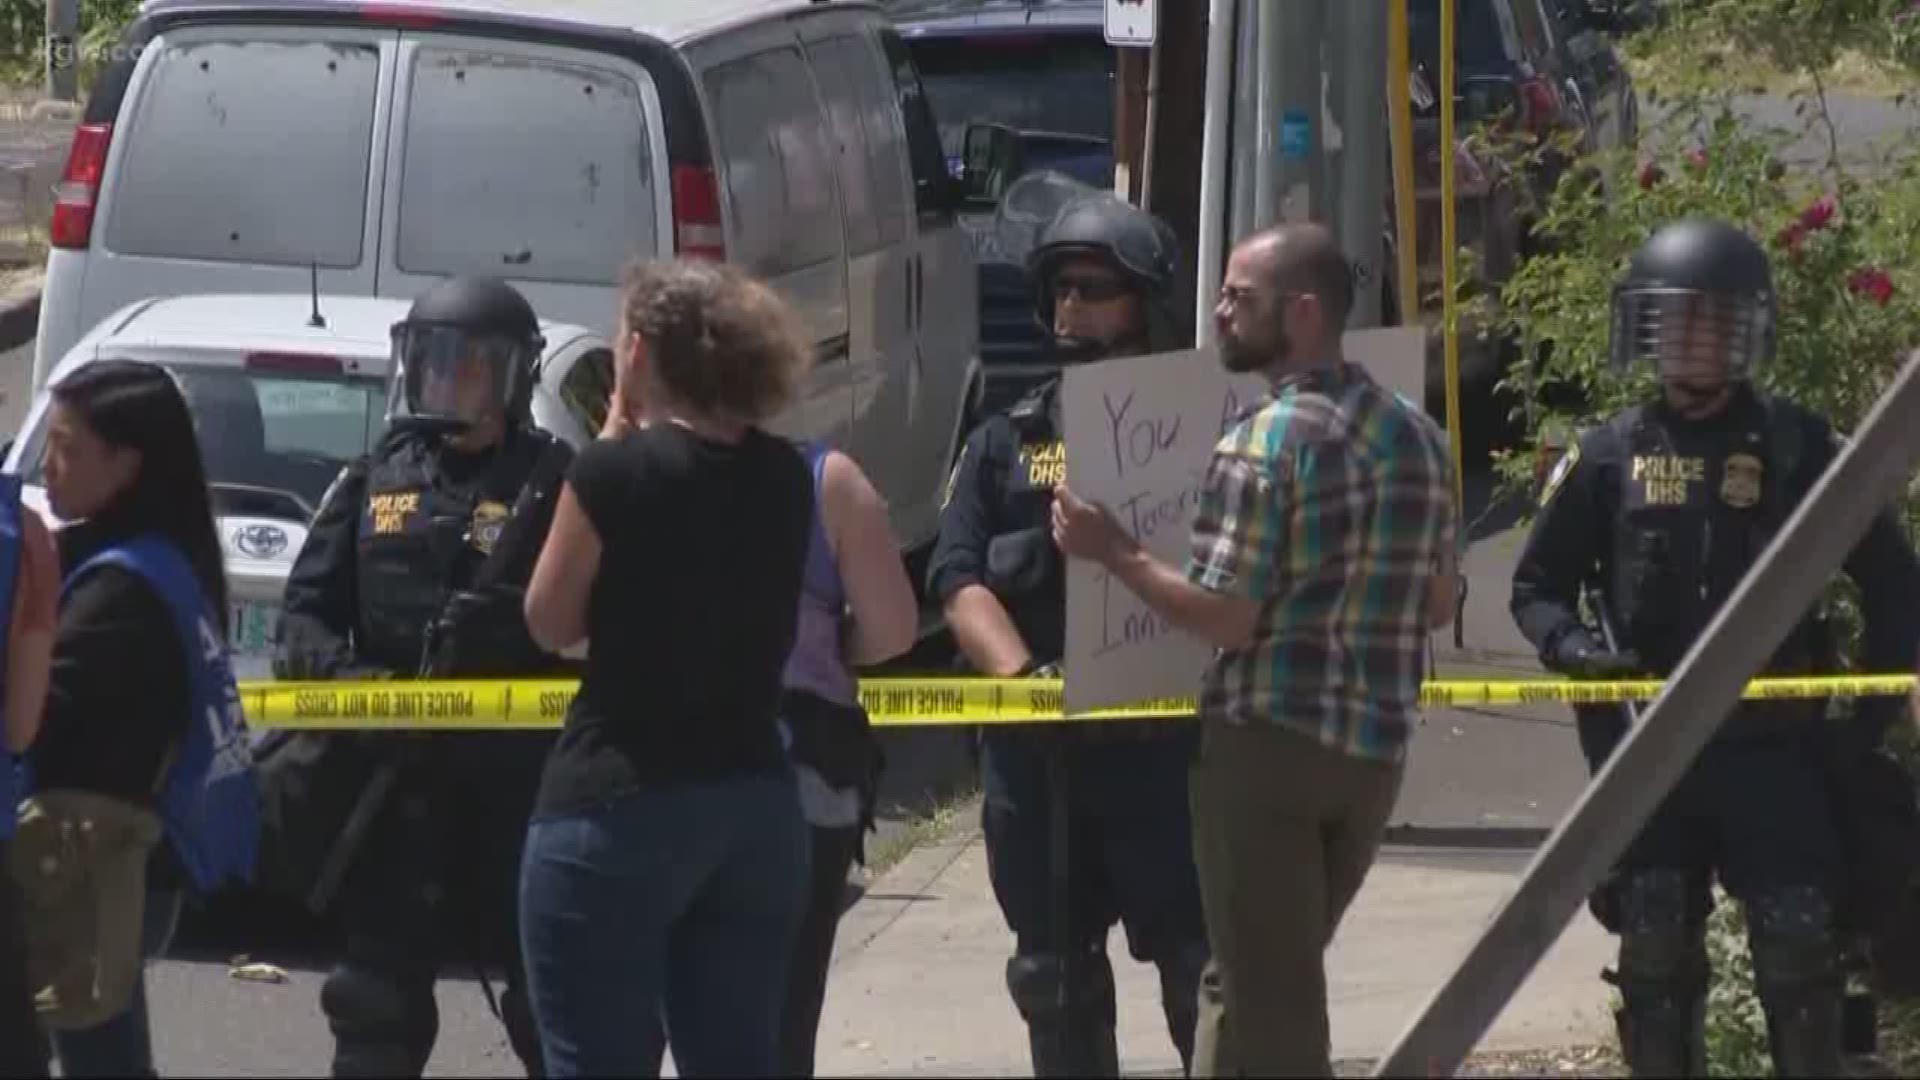 What's next for the Portland ICE protesters?